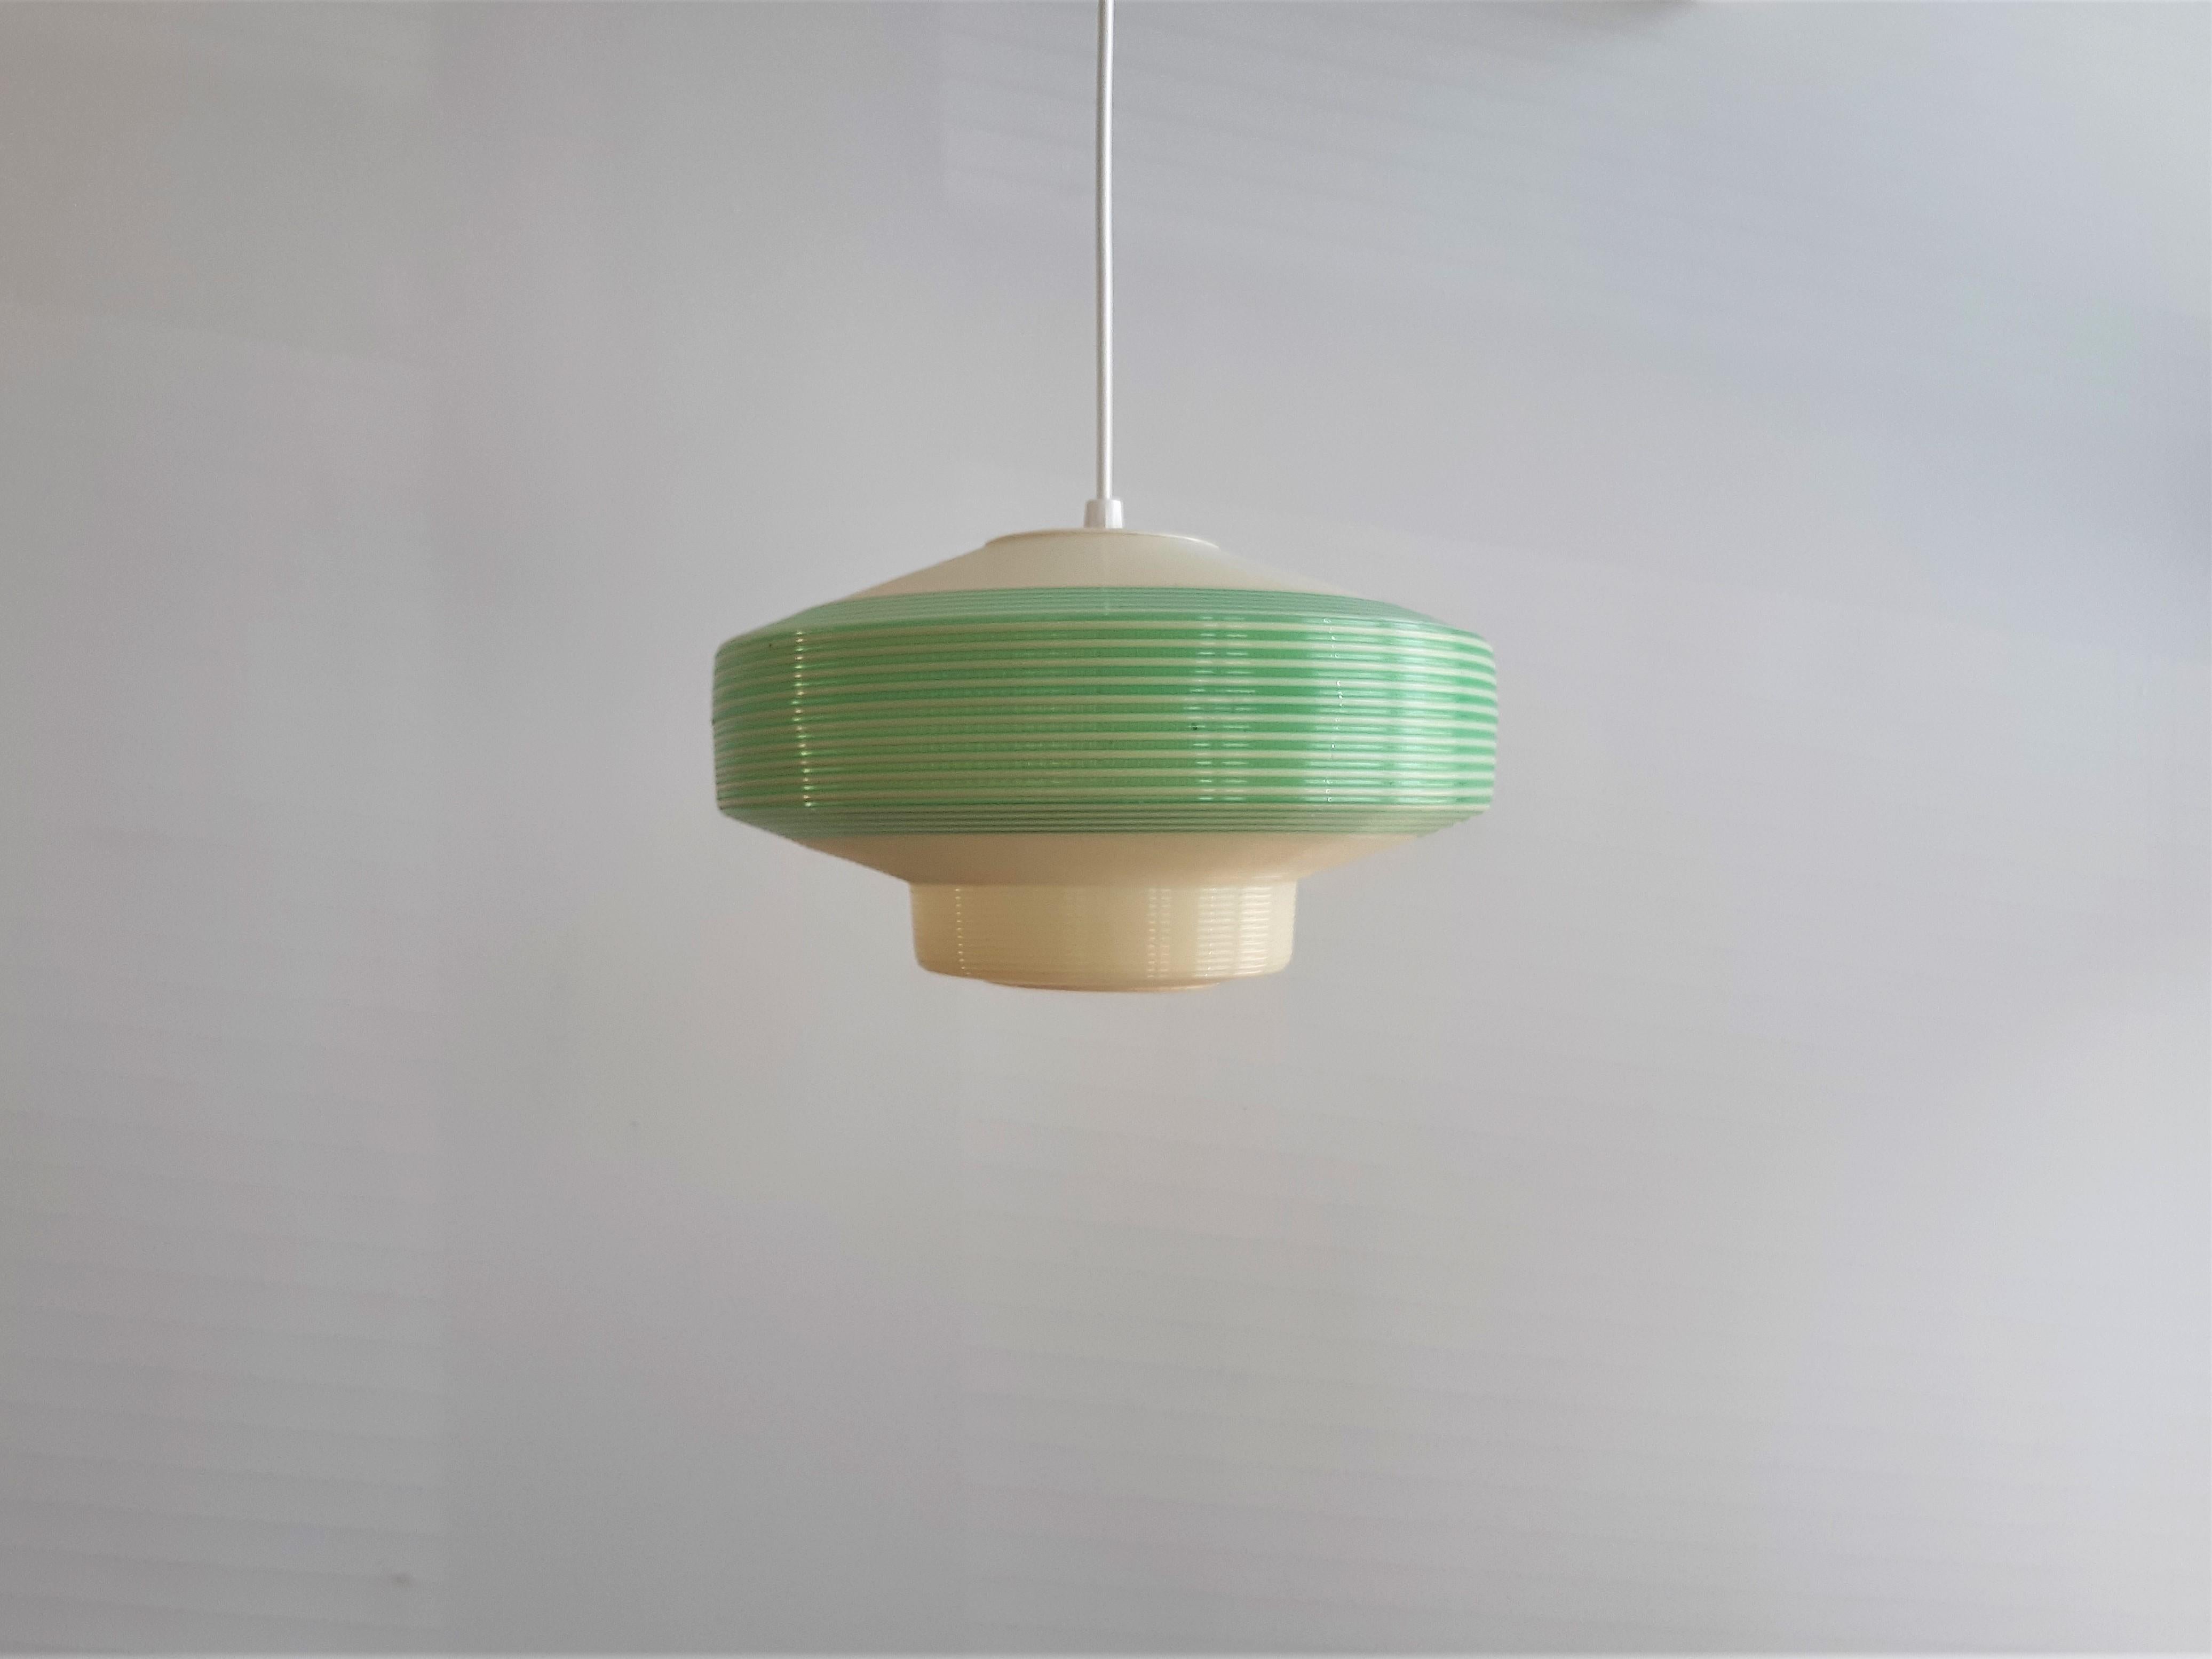 This elegant pendant lamp was made by Rotaflex, probably in the 1960's. It is made fully out of Cellulose Acetate (plastics) in white and green. The use of material spreads and diffuses the light very nicely. This lamp is marked by Rotaflex at the